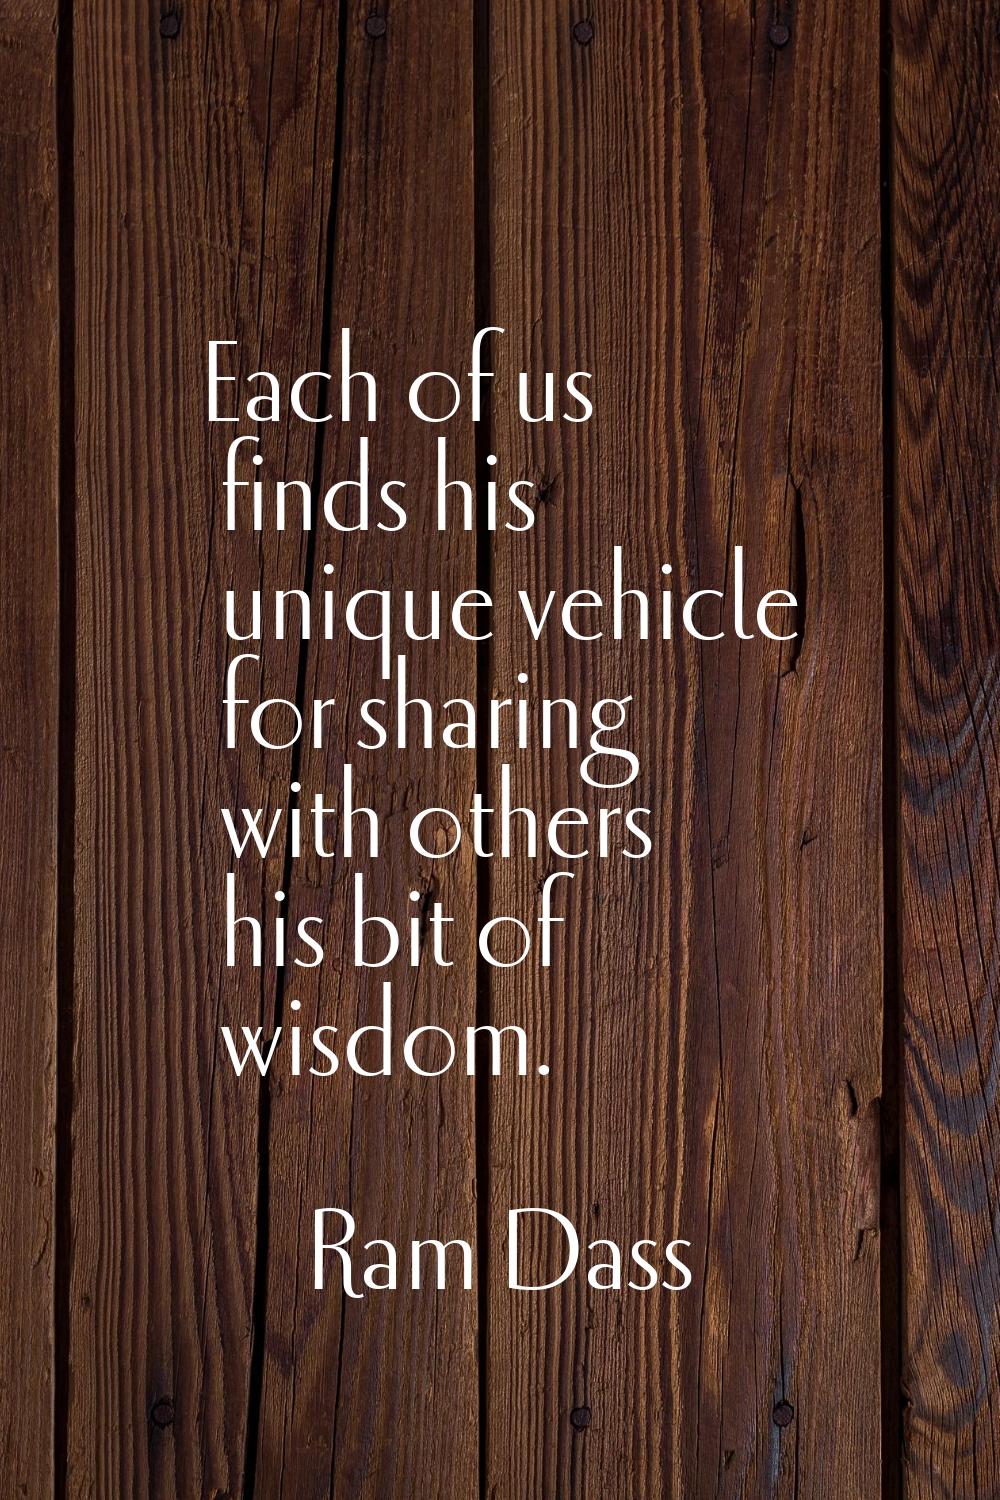 Each of us finds his unique vehicle for sharing with others his bit of wisdom.